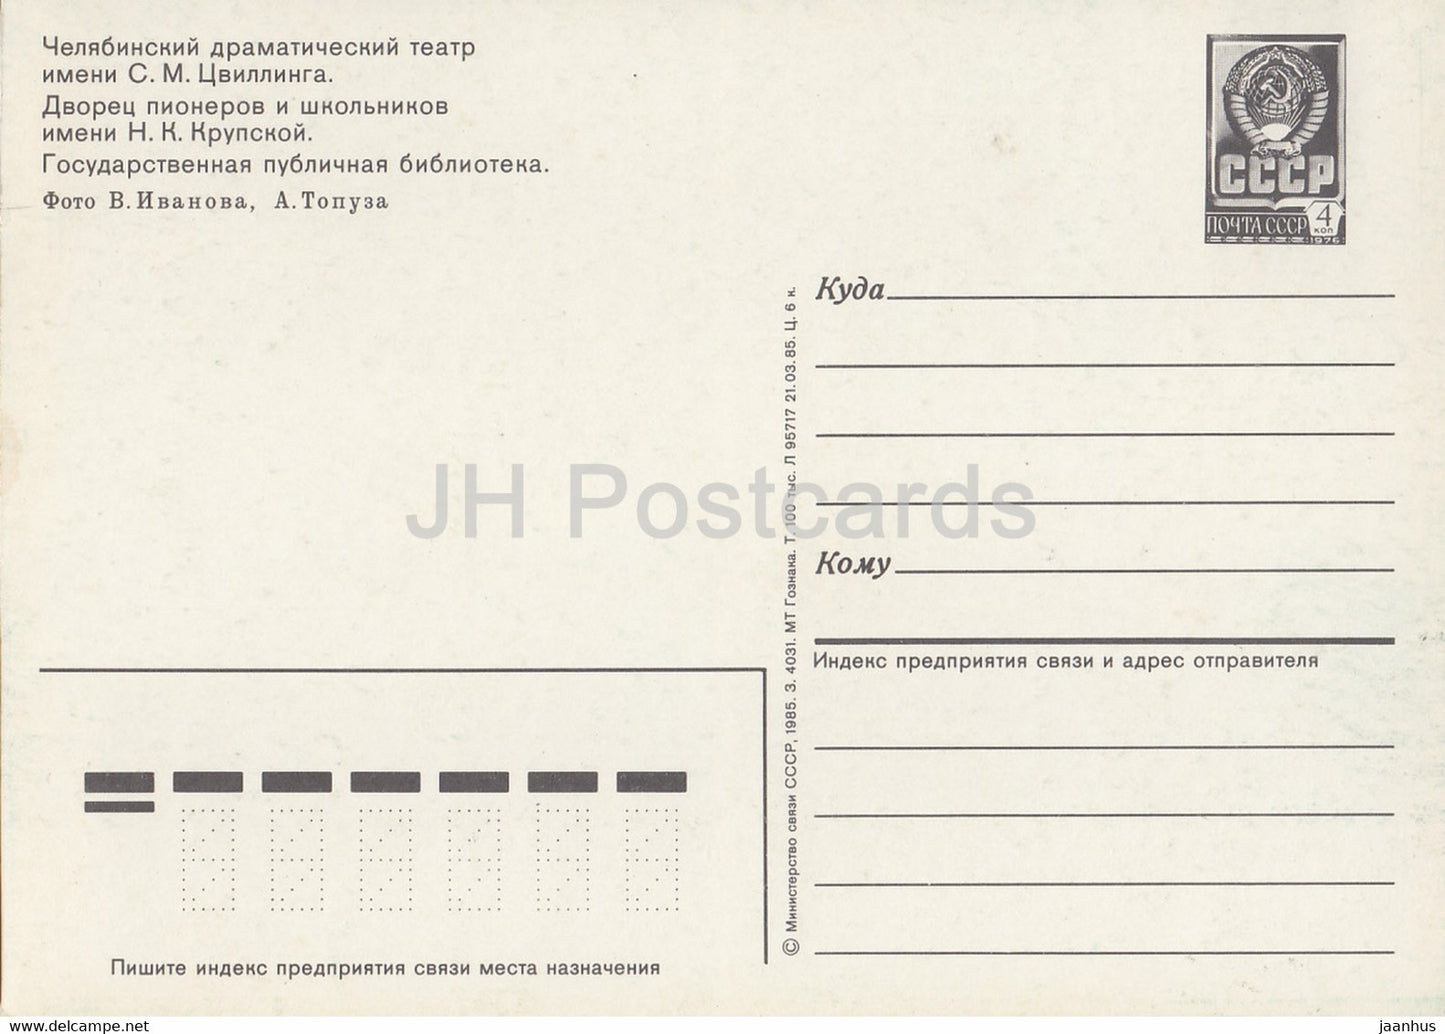 Chelyabinsk - Tsvilling Drama Theatre - Pioneer Palace - State Library - postal stationery - 1985 - Russia USSR - unused